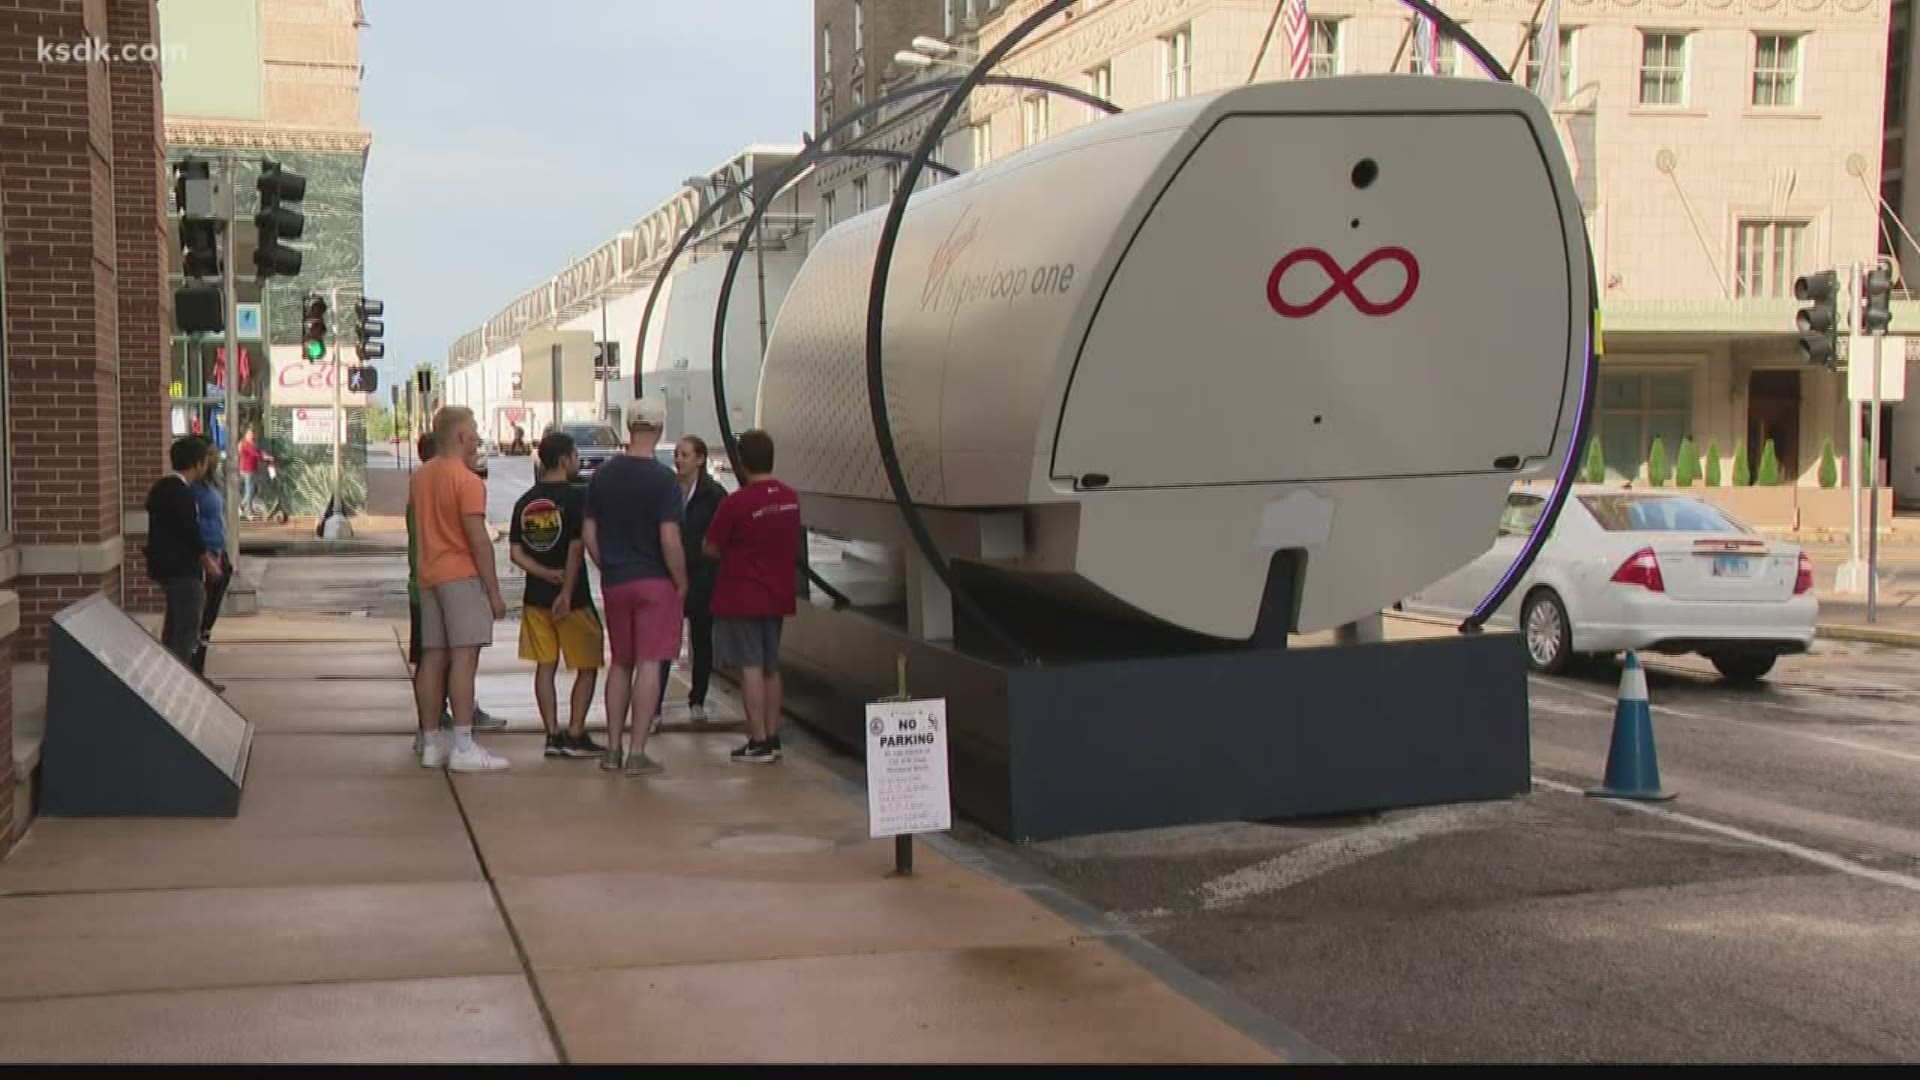 Potential riders are crossing their fingers the Hyperloop will one day become a reality in St. Louis.